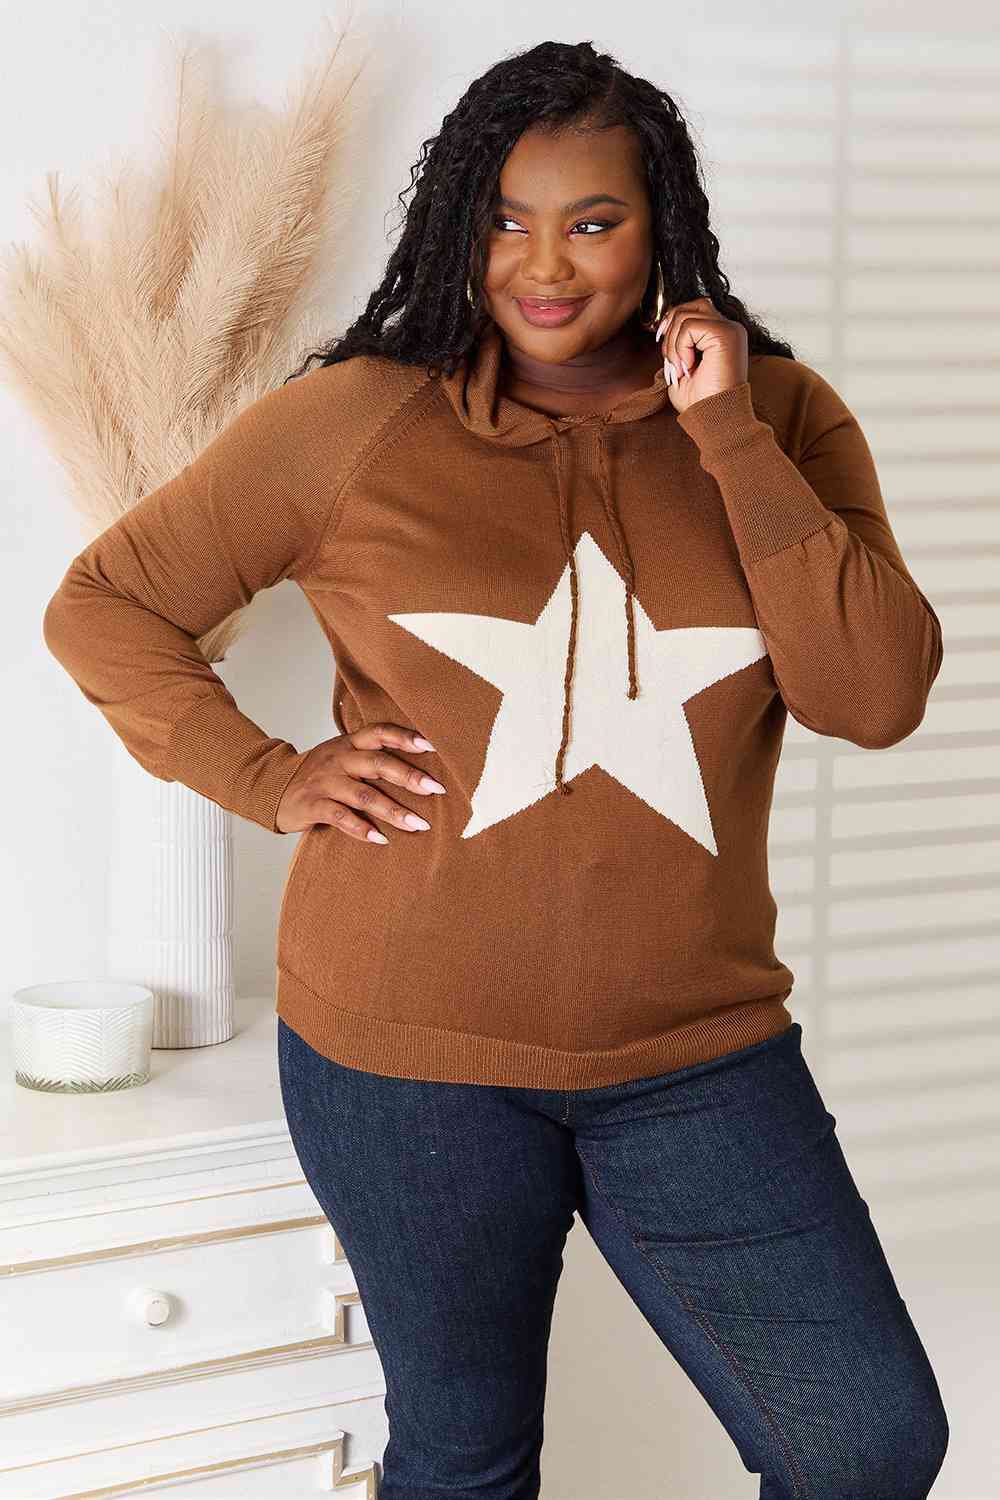 Light Gray Heimish Full Size Star Graphic Hooded Sweater Sentient Beauty Fashions Apparel & Accessories